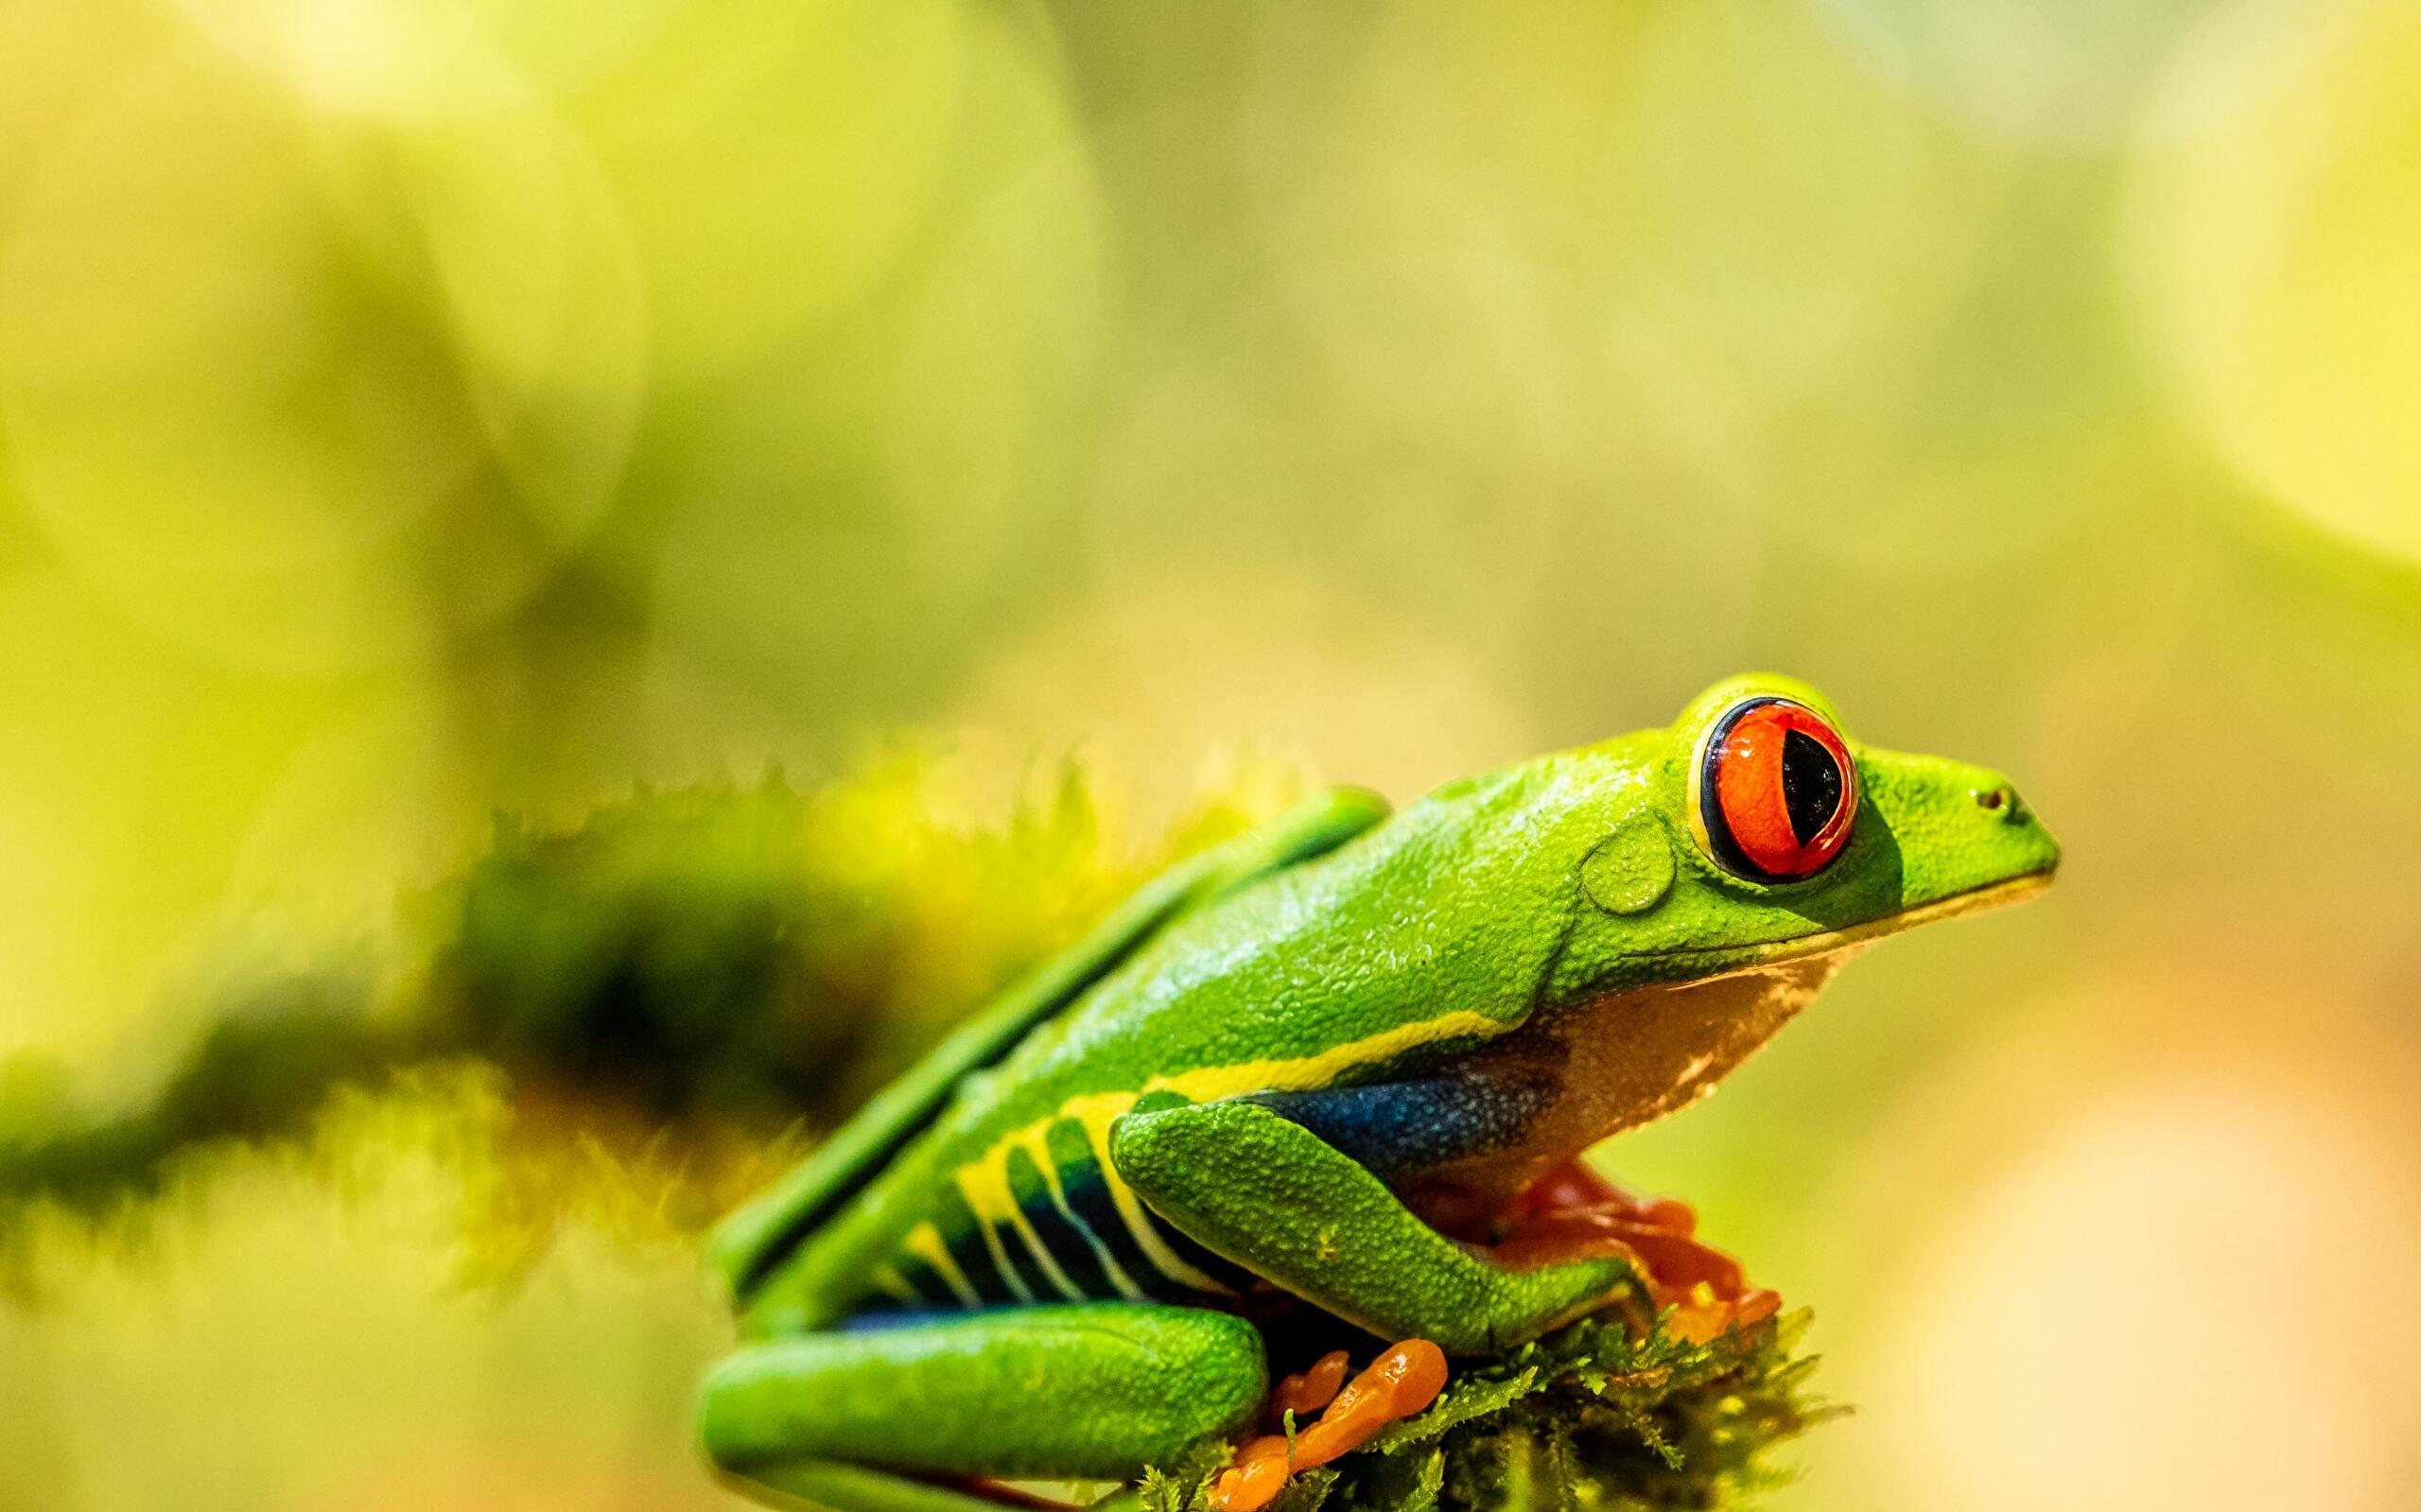 Frog 4K wallpapers for your desktop or mobile screen free and easy